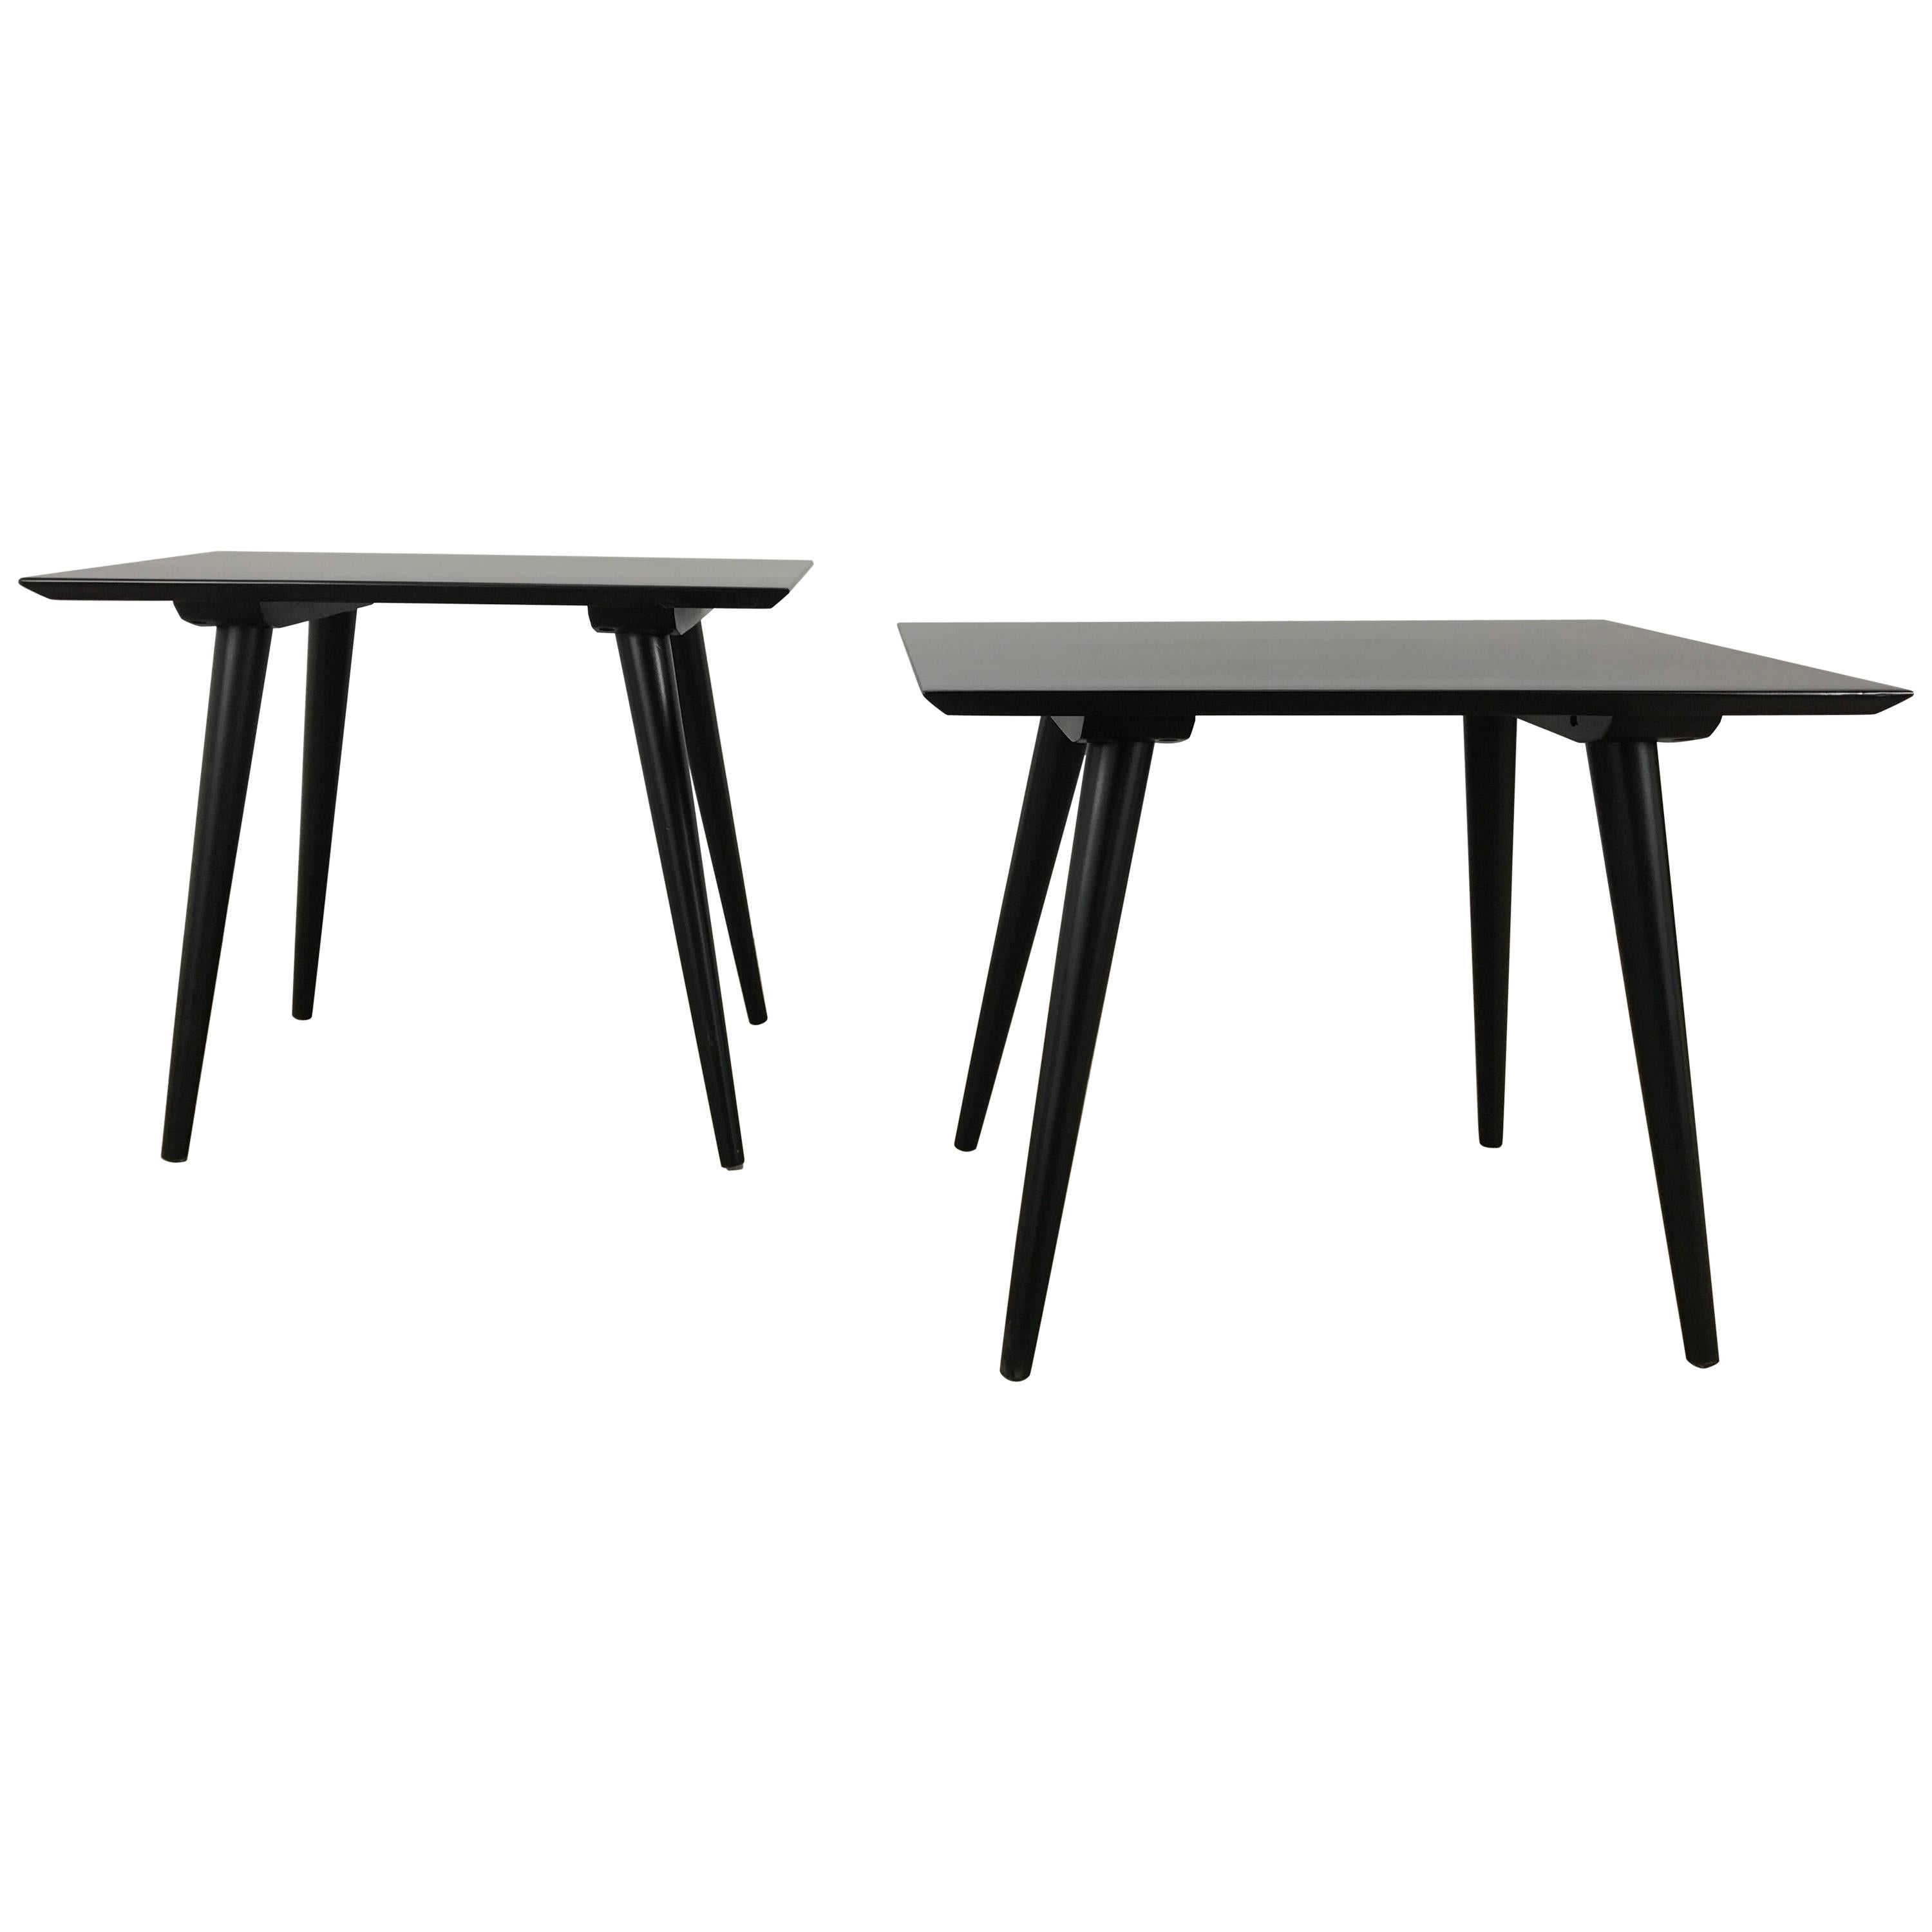 Pair of Classic Modern "Planner Group" Side Tables, by Paul McCobb